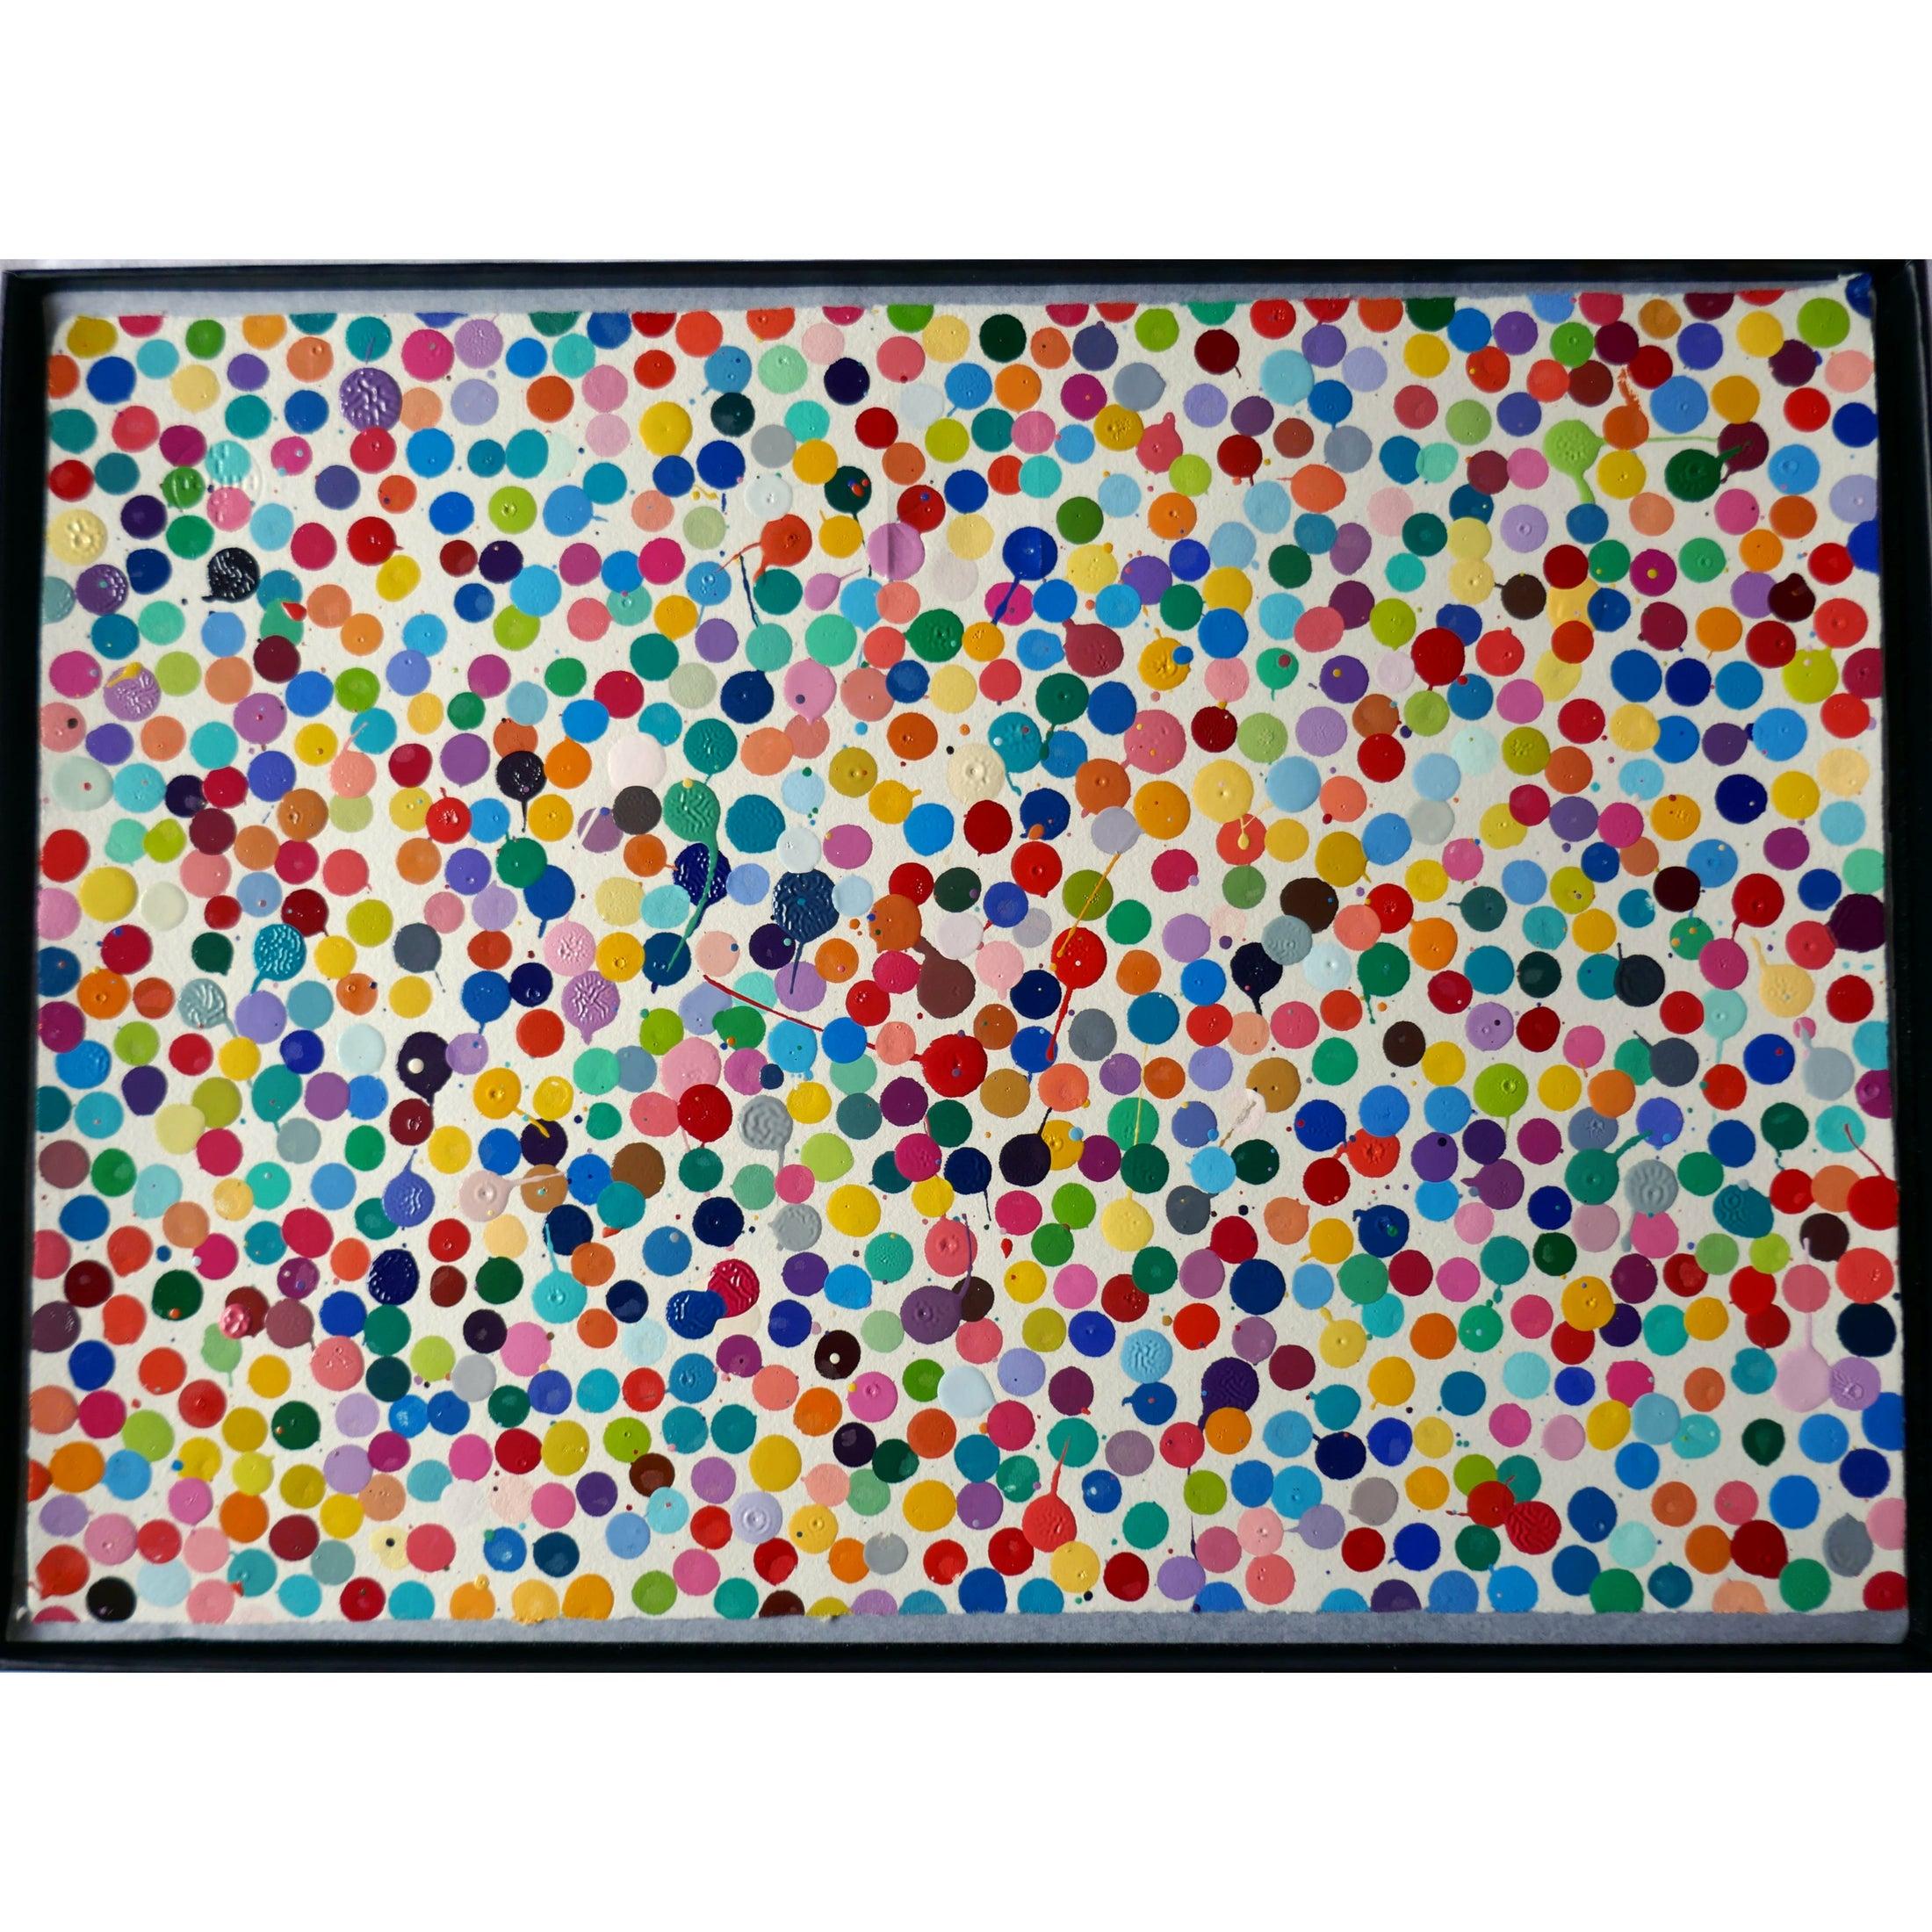 Damien Hirst Abstract Print - 'Seeing Her Again' (The Currency) - 1467